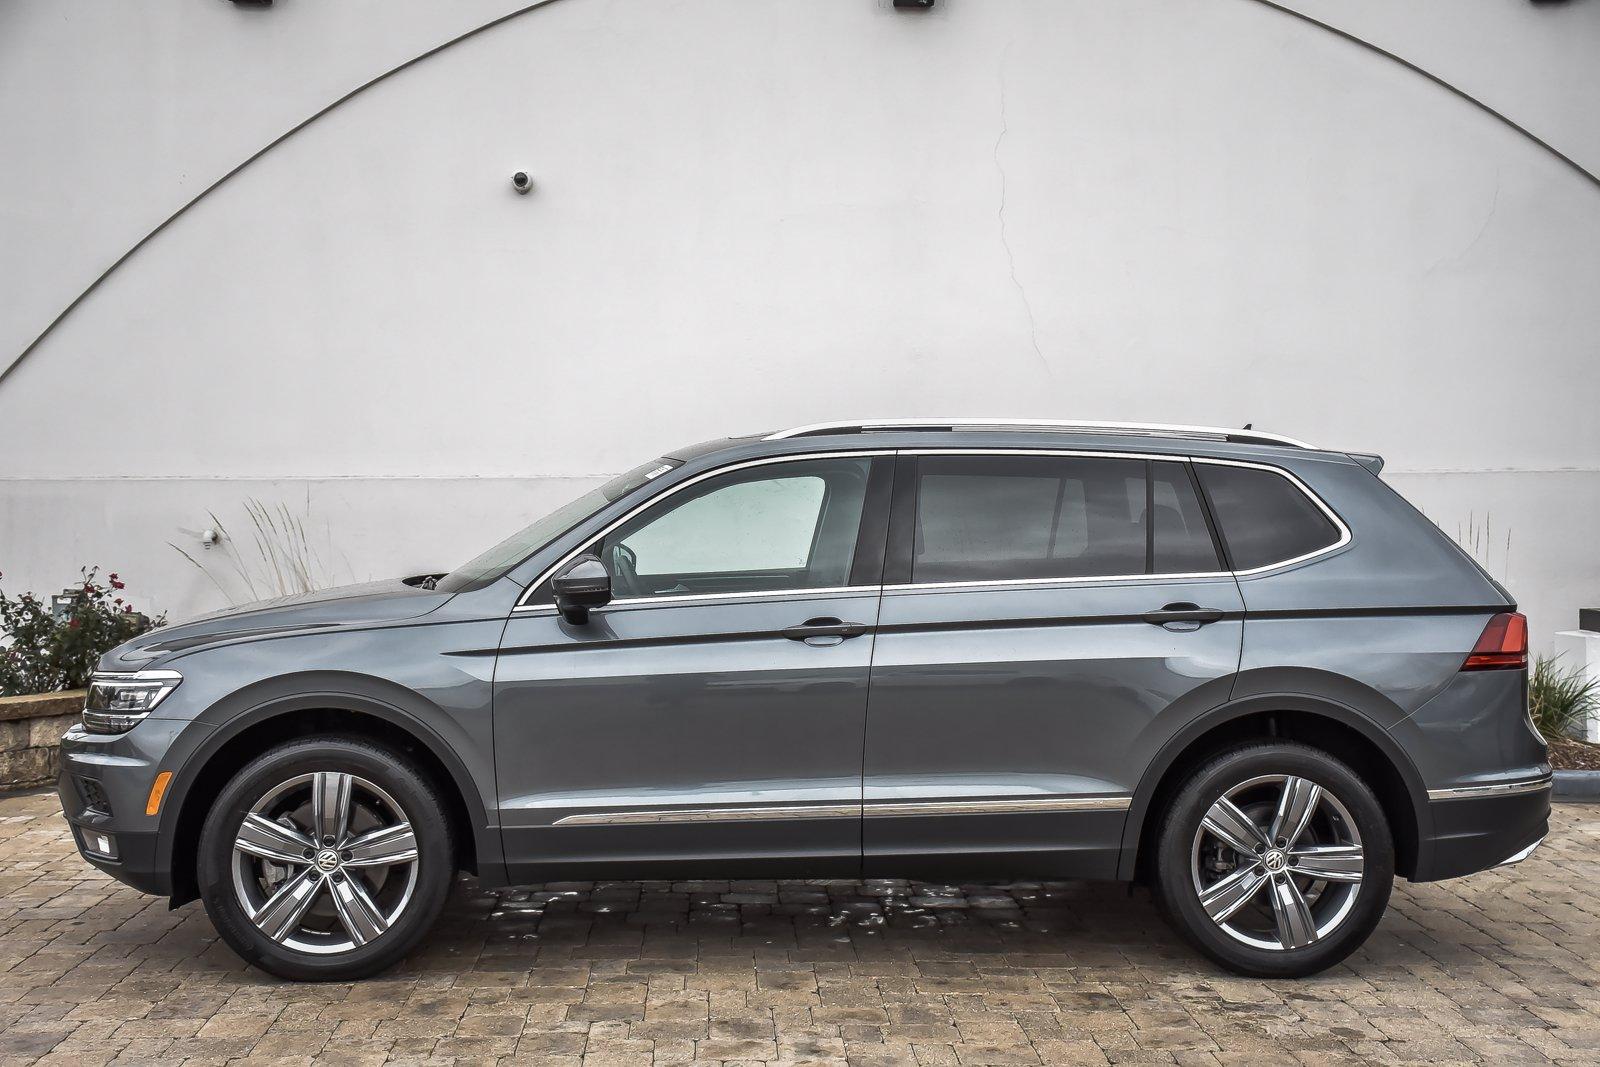 Used 2019 Volkswagen Tiguan SEL Premium, 3rd Row, | Downers Grove, IL